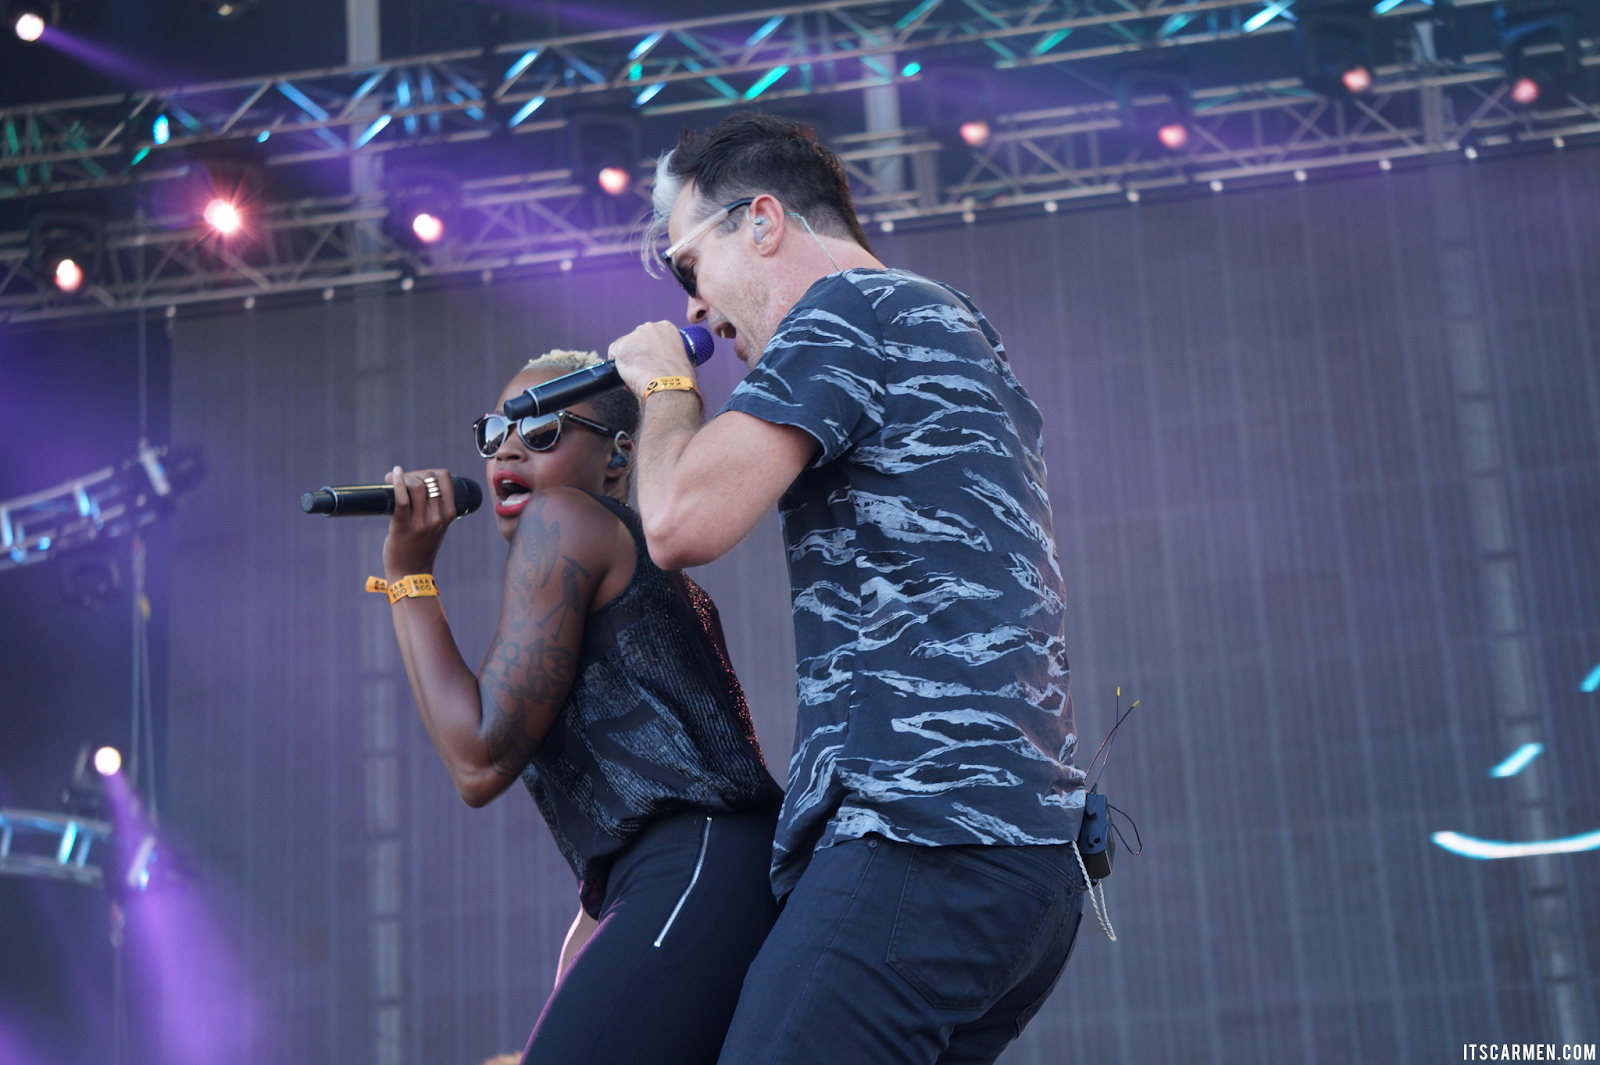 fitz& the tantrums, kaaboo